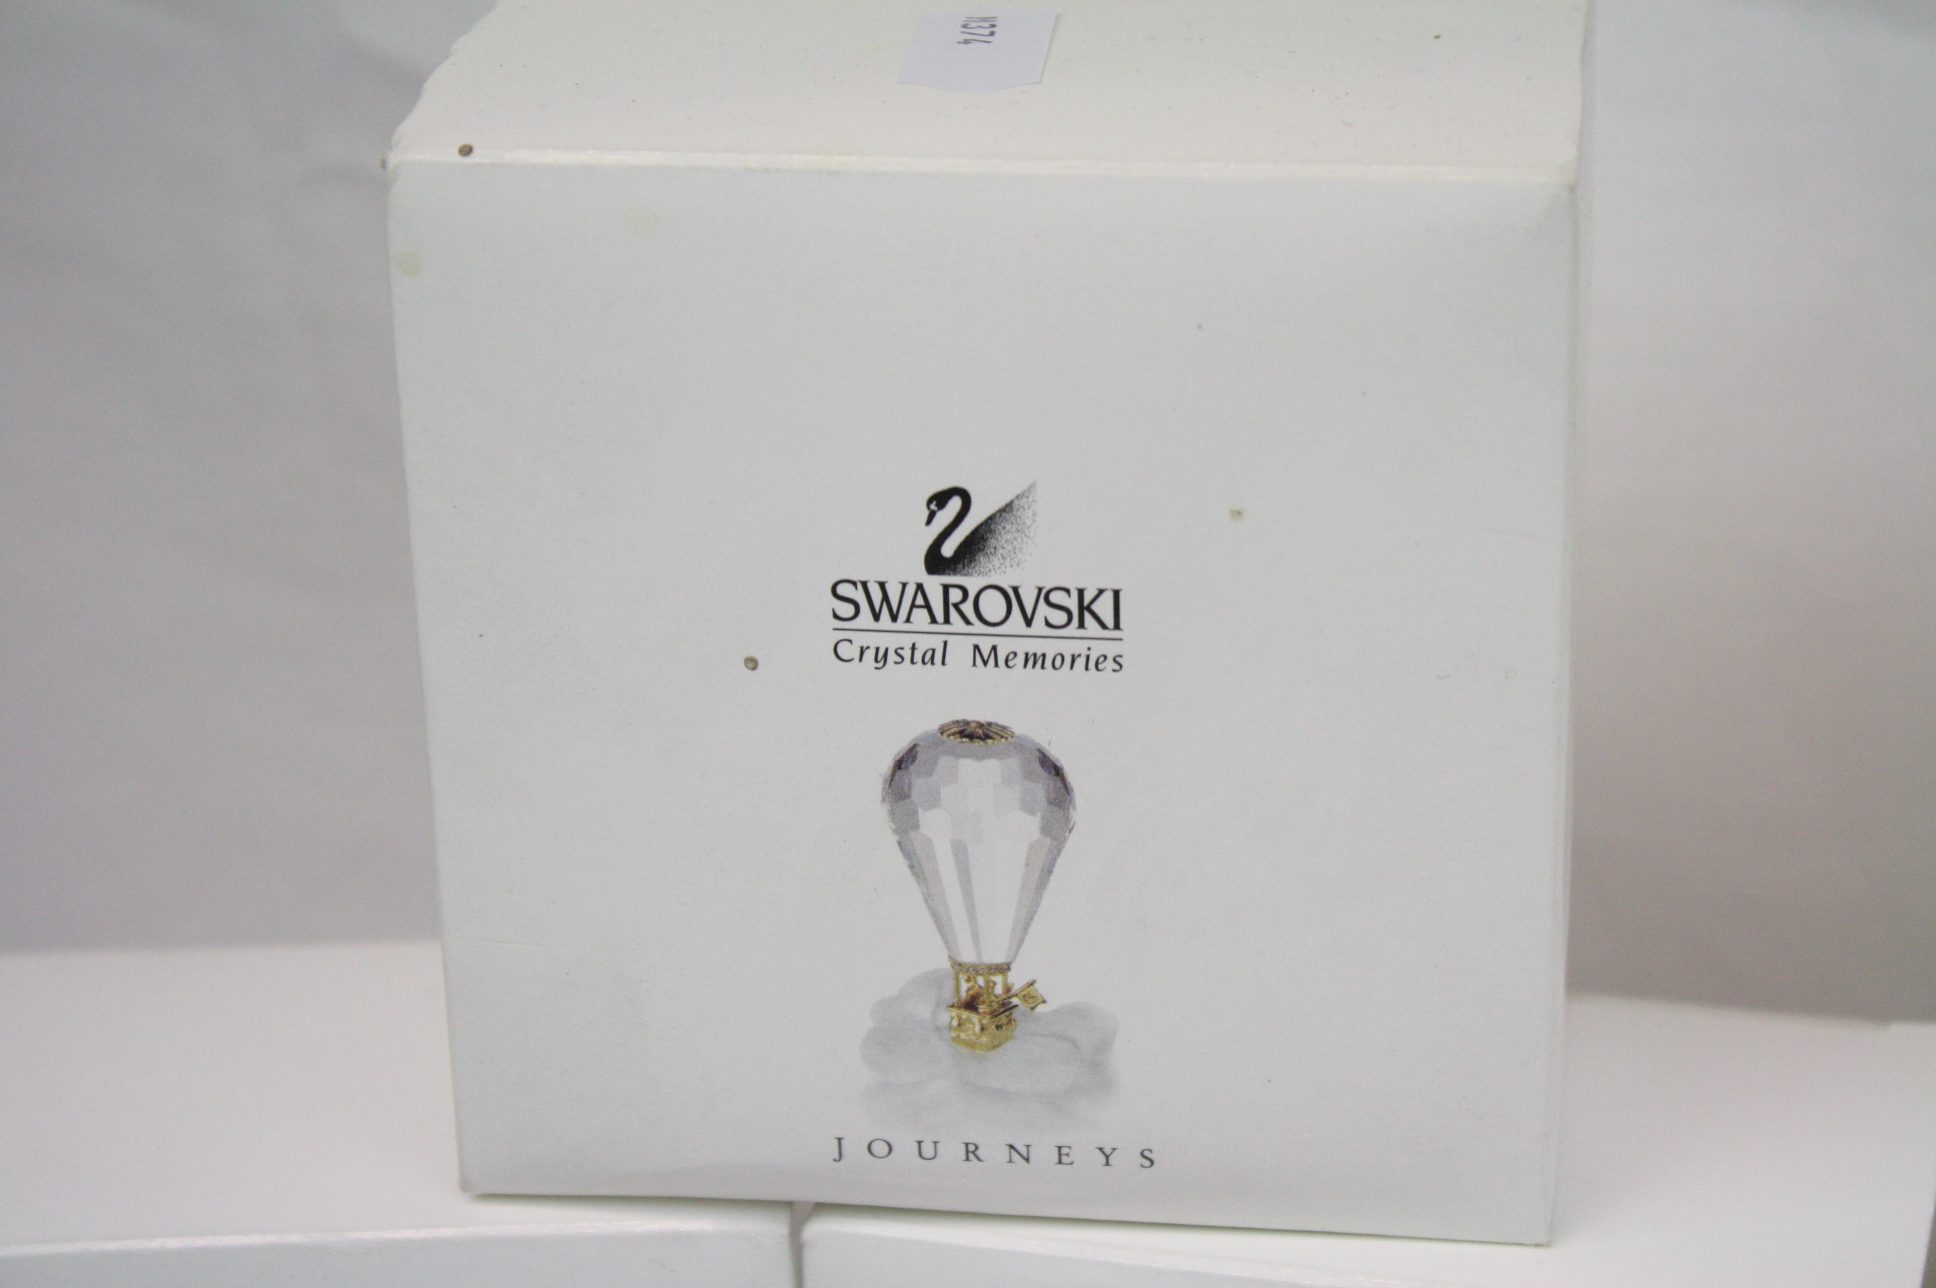 Collection of six Swarovski crystal memories 'Journeys' in gold with original boxes - Image 3 of 8